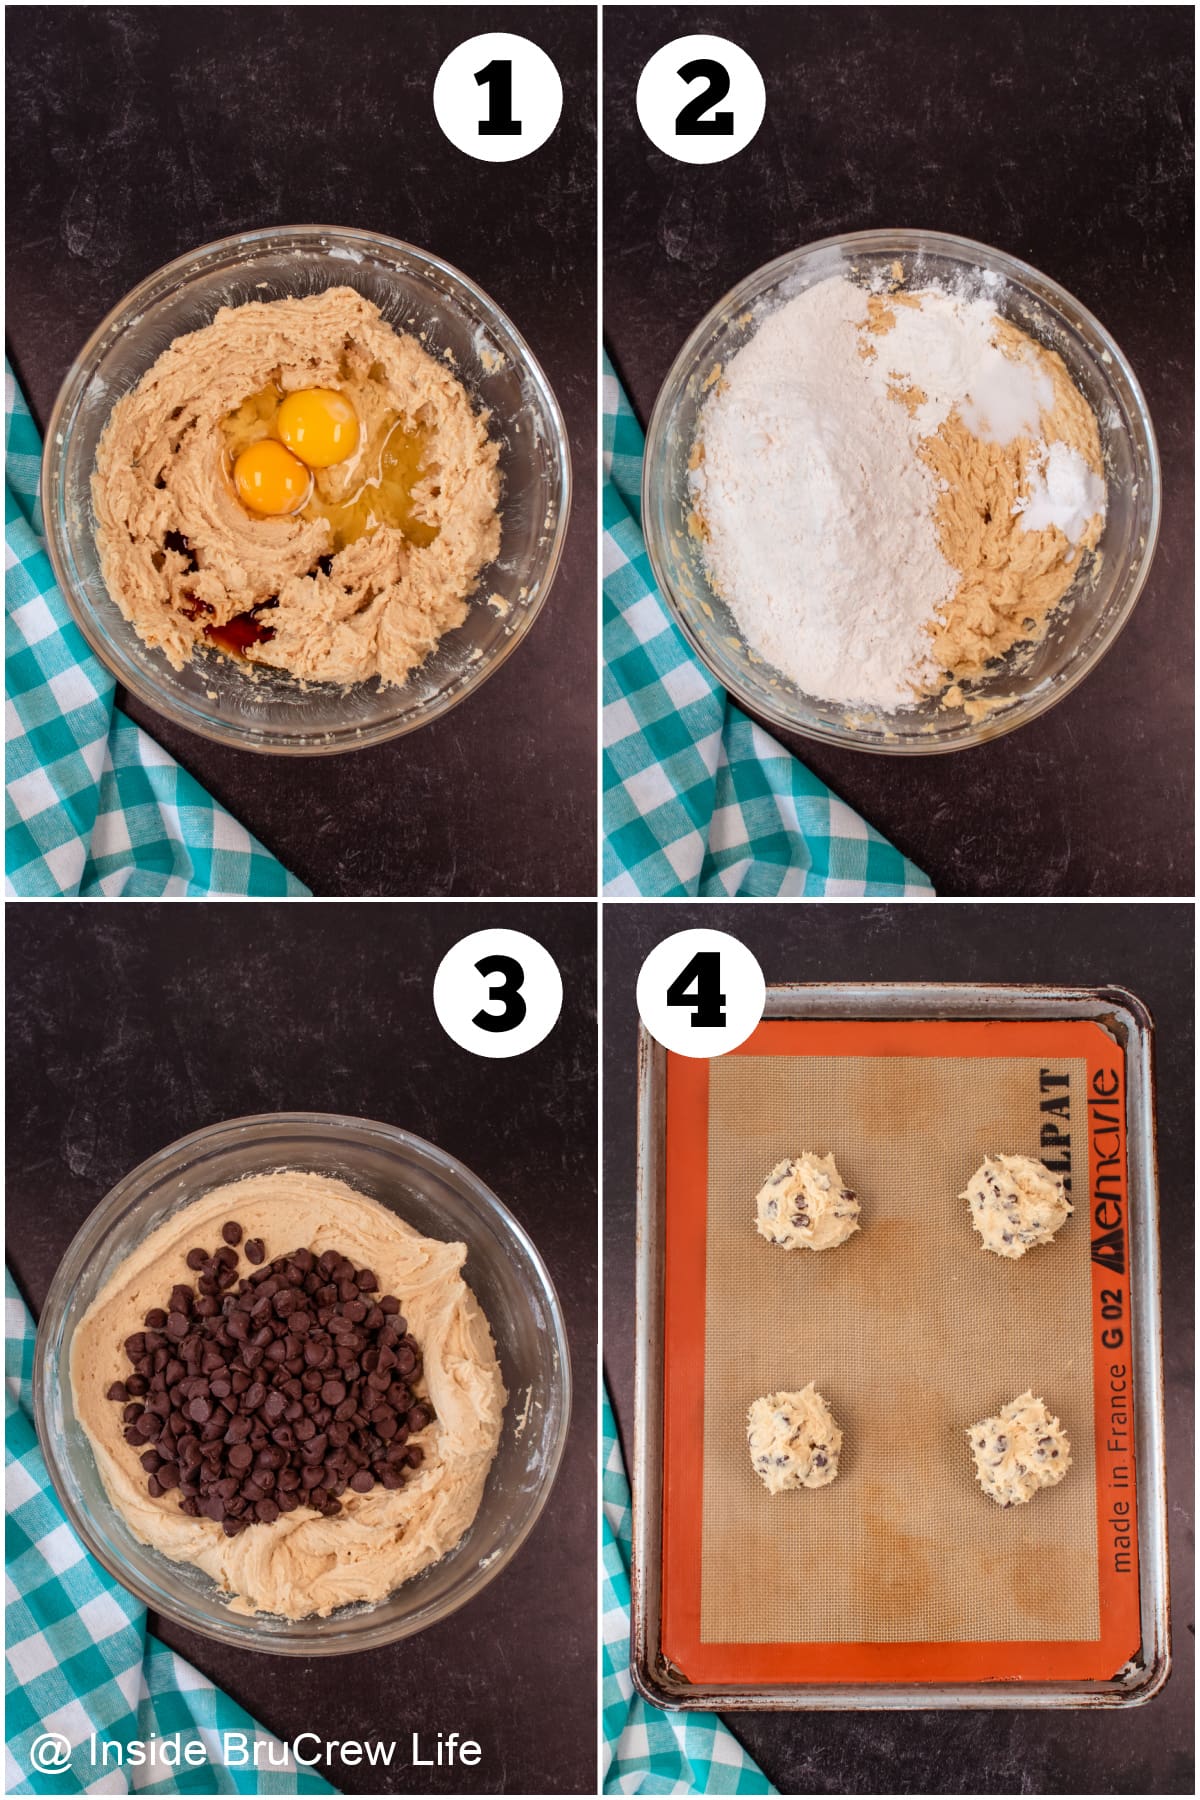 Four pictures collaged together showing how to make puffy and thick chocolate chip cookies.